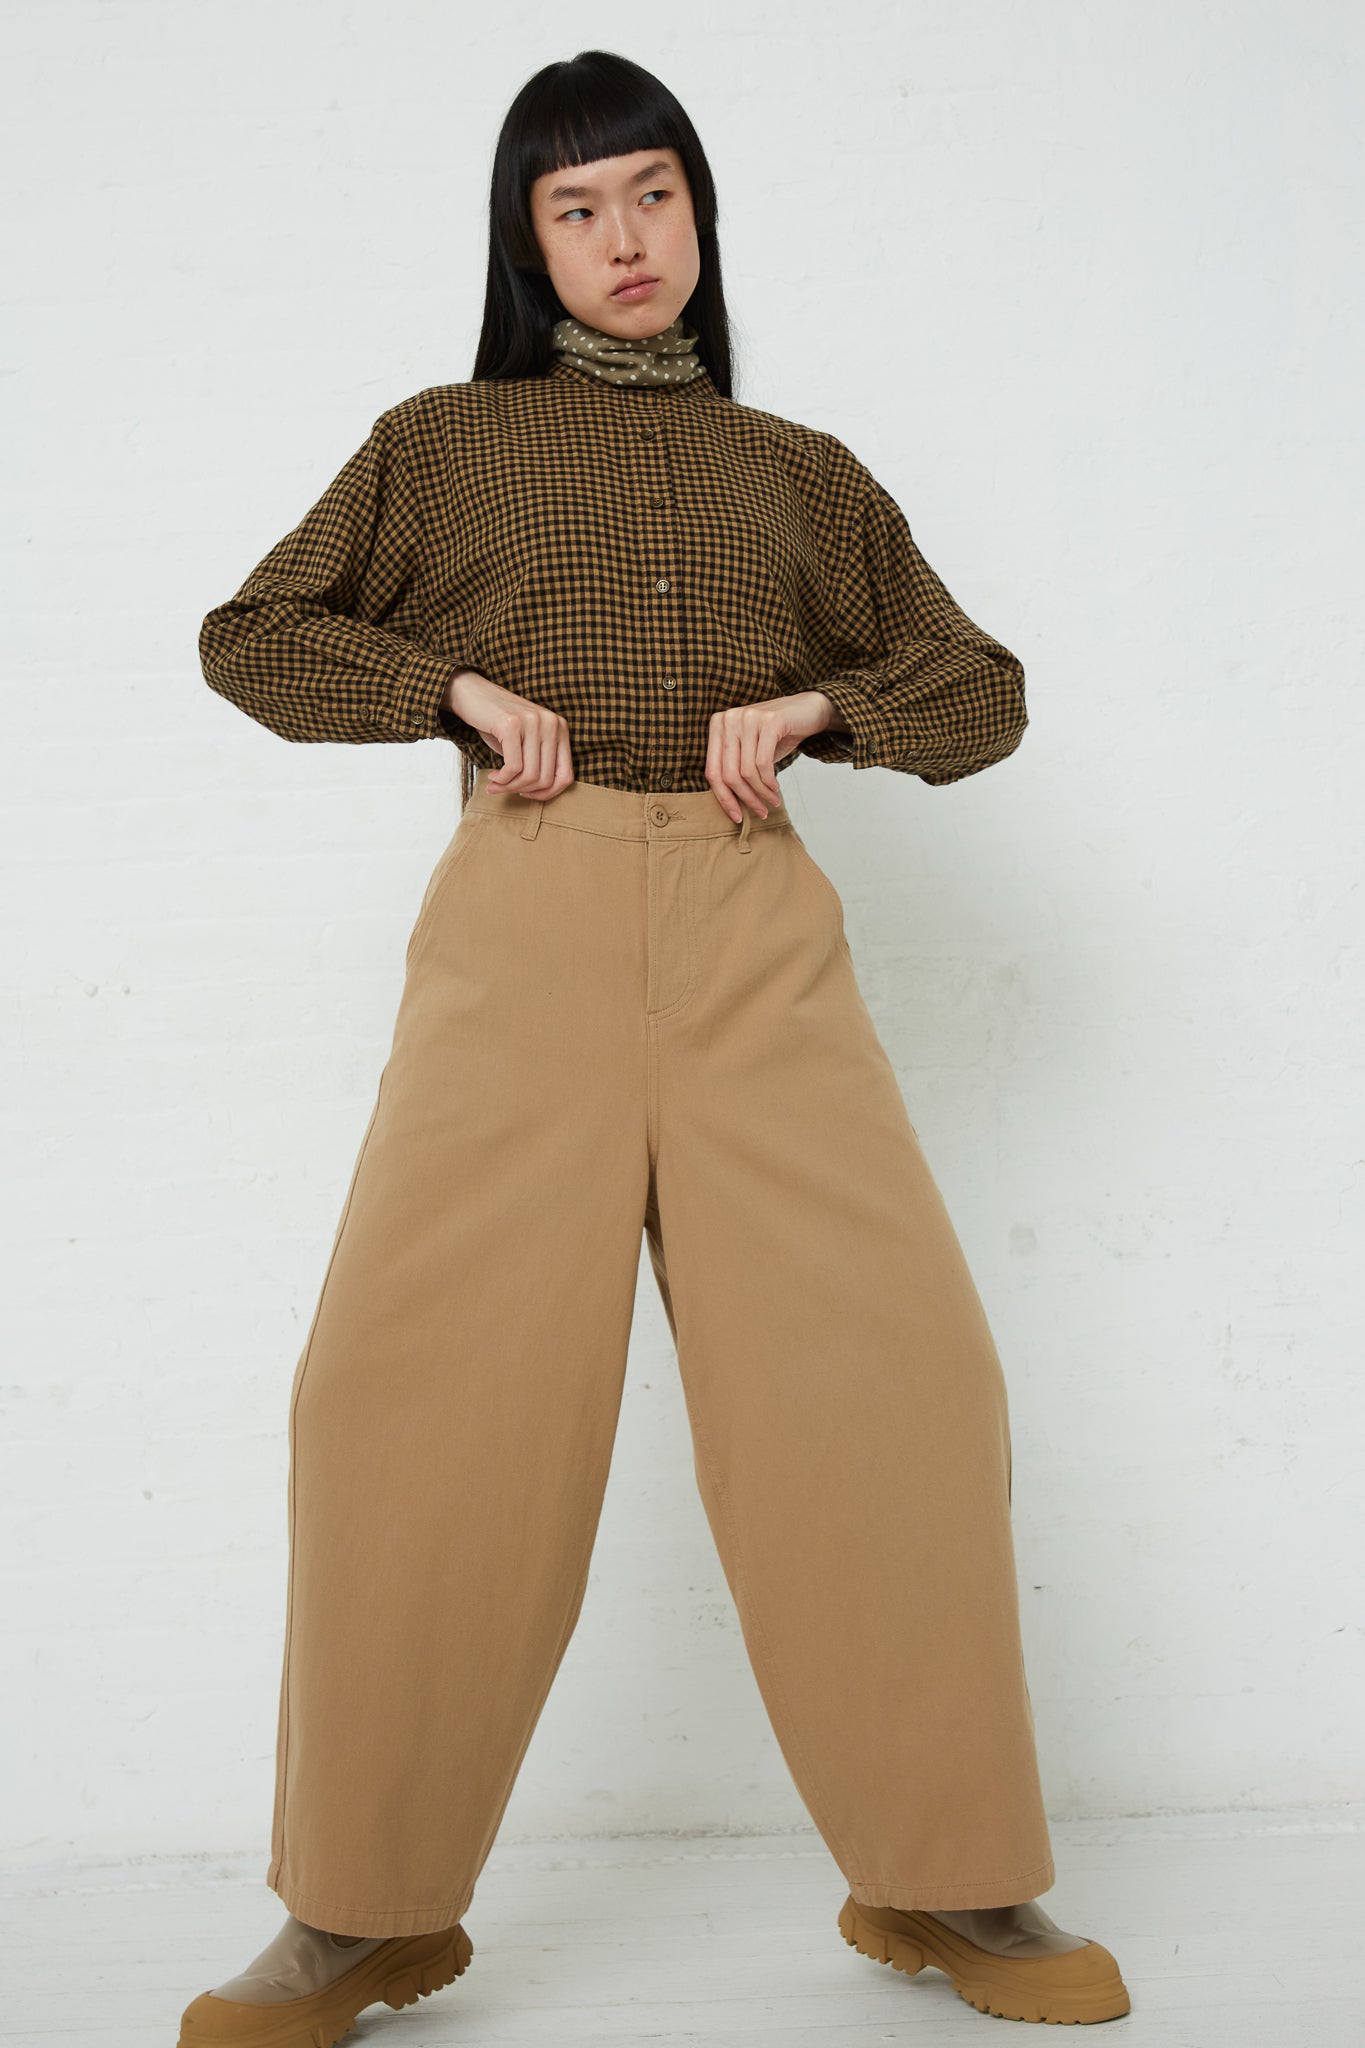 The model is wearing a wide leg pant in the Ichi Cotton Pant in Beige.